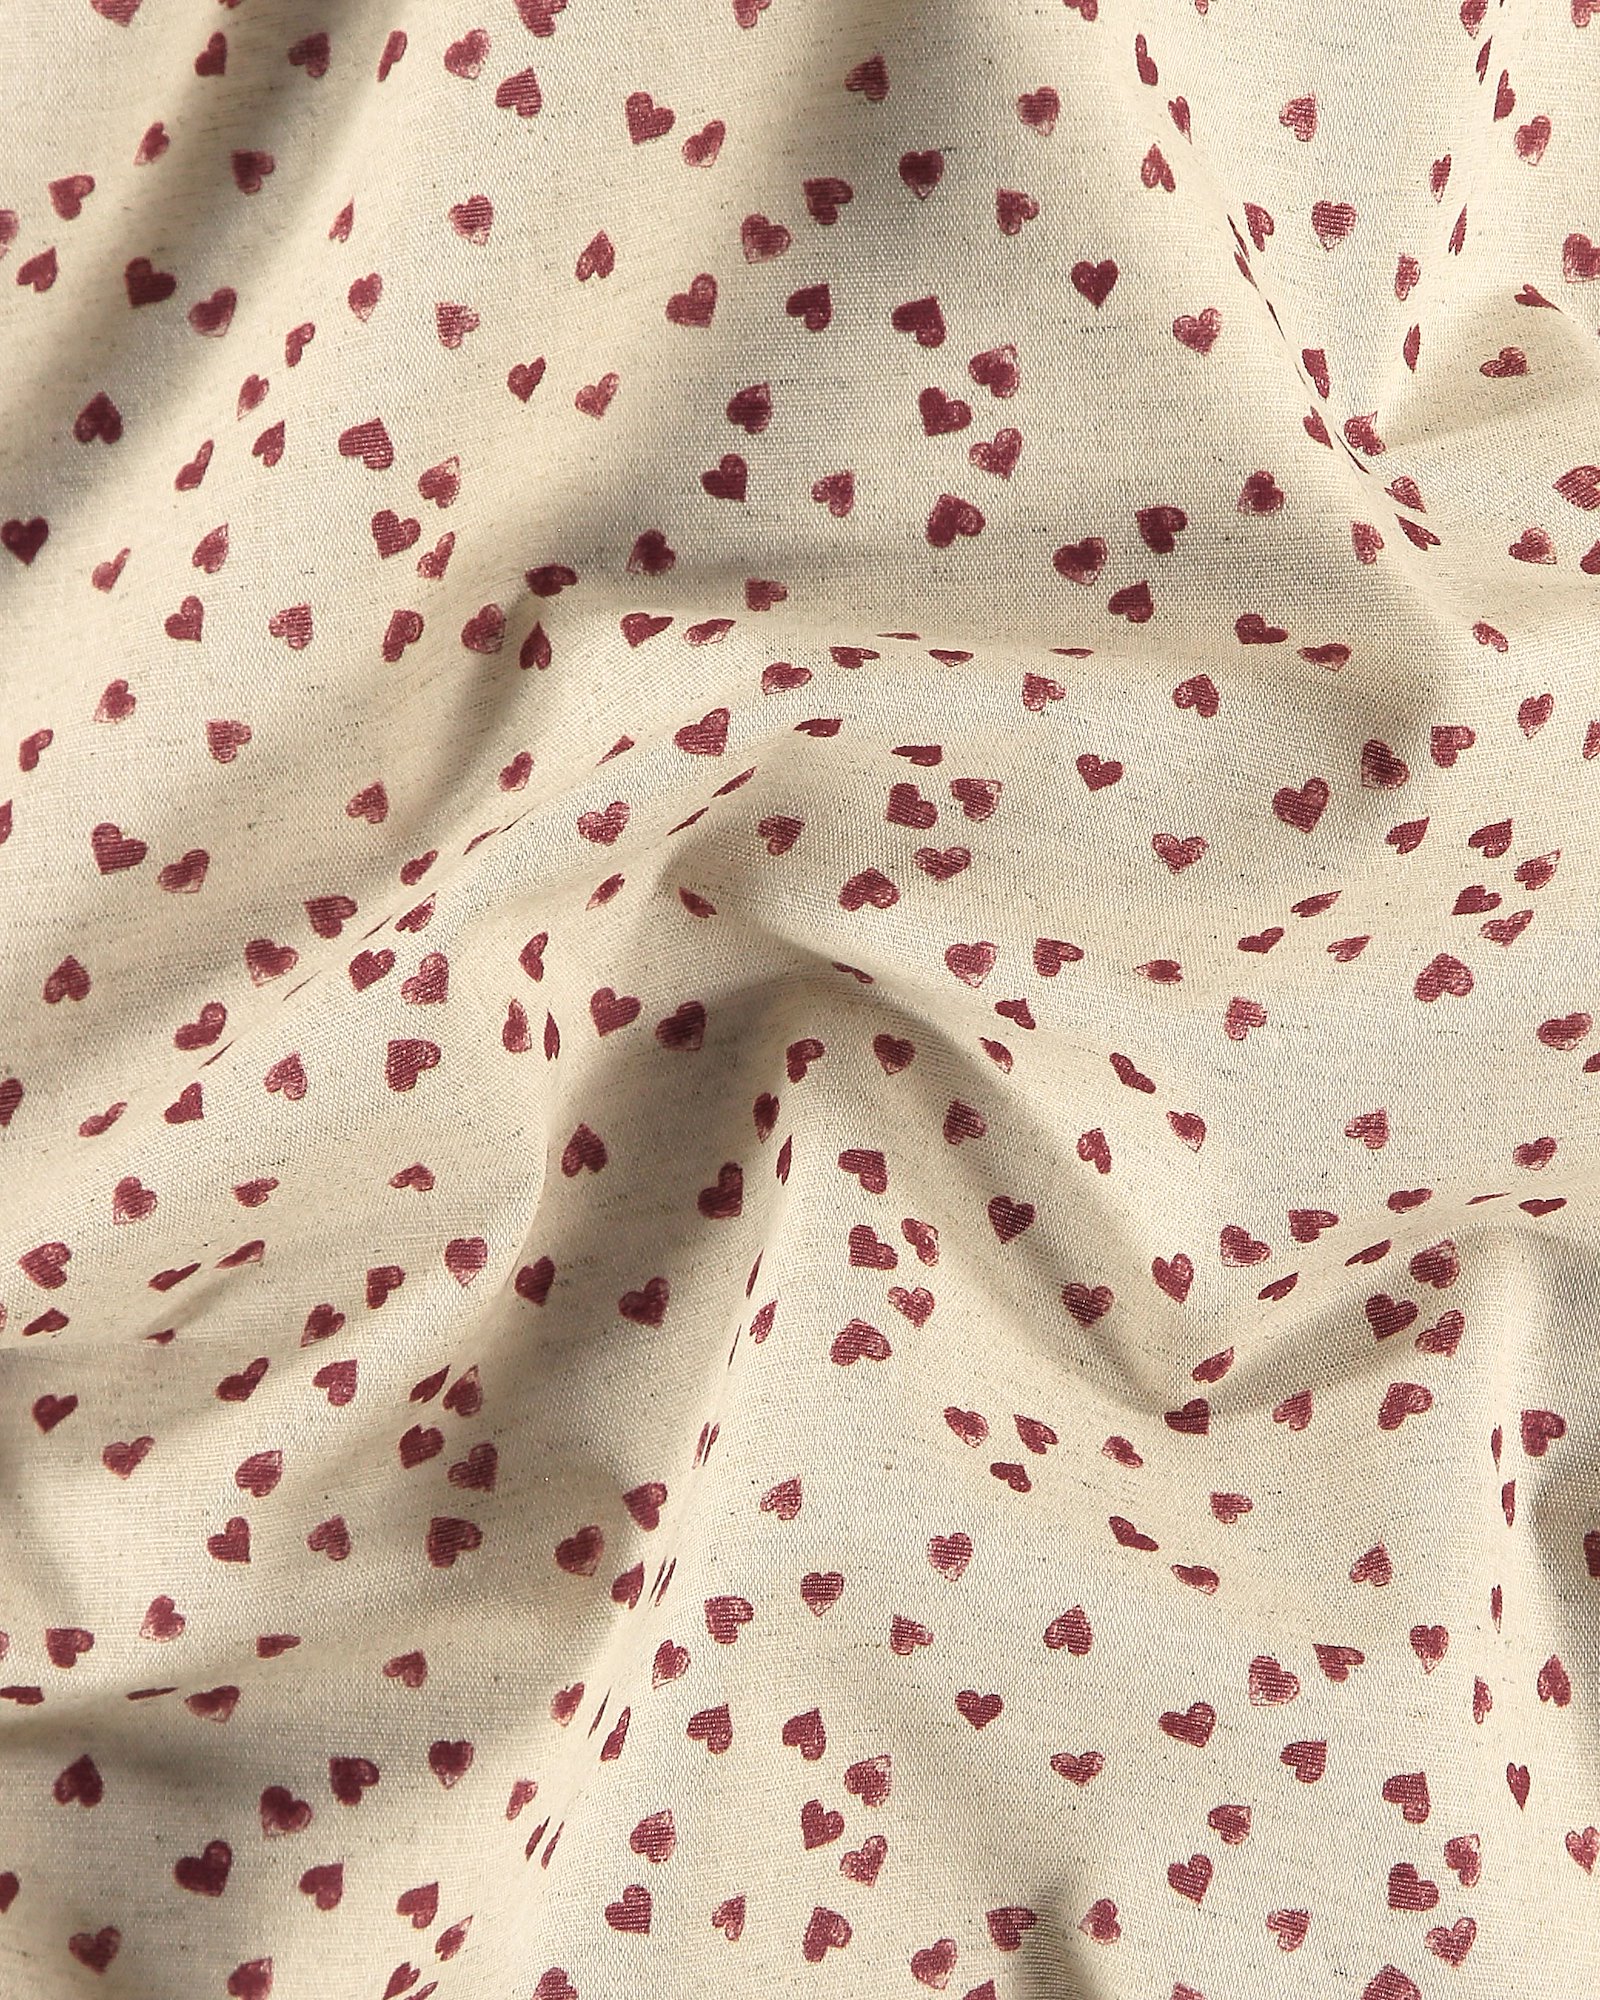 Woven cotton/linen with red hearts 780557_pack